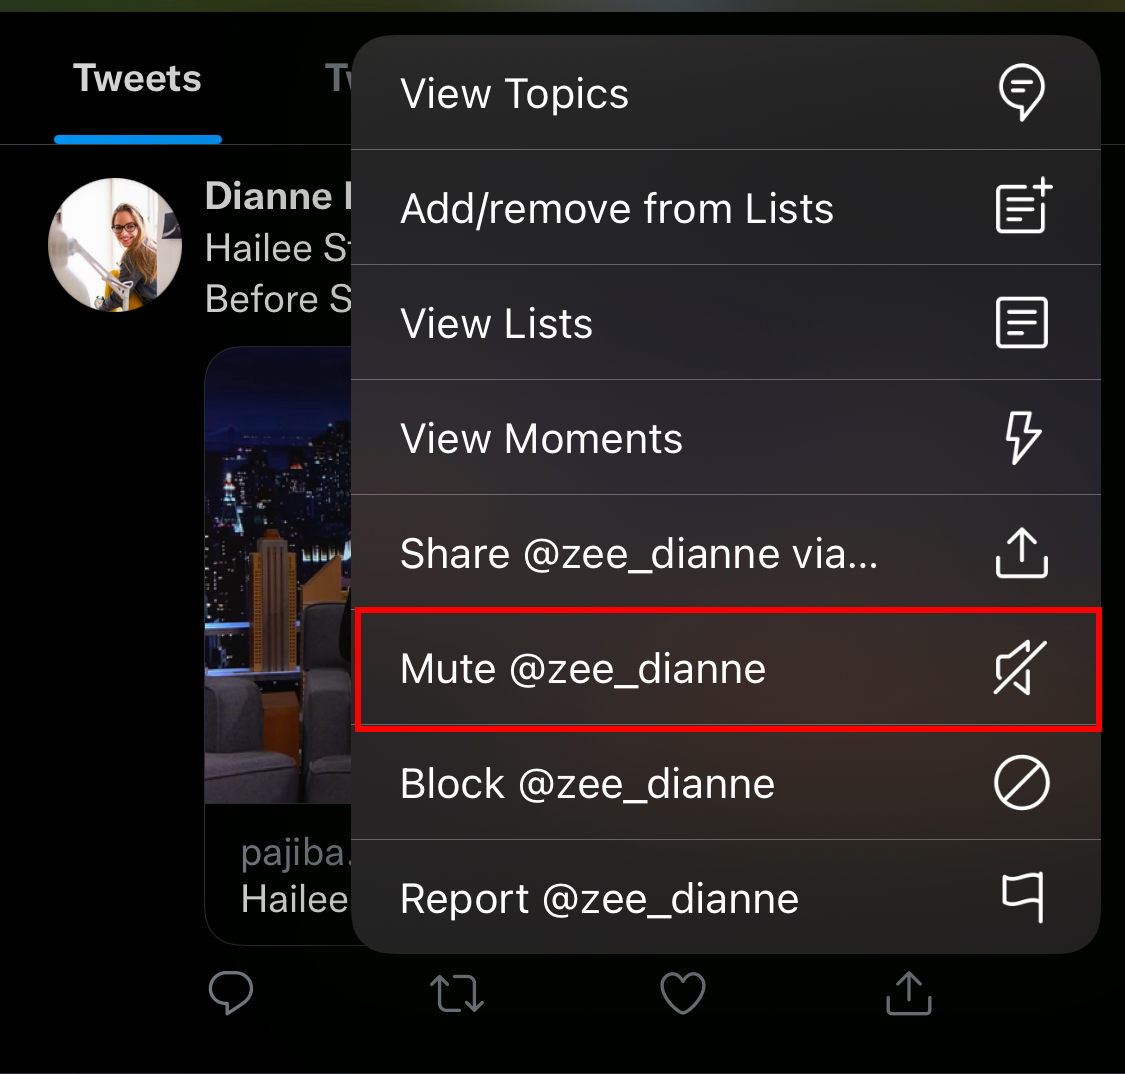 After you mute someone on Twitter, you can easily unmute the account